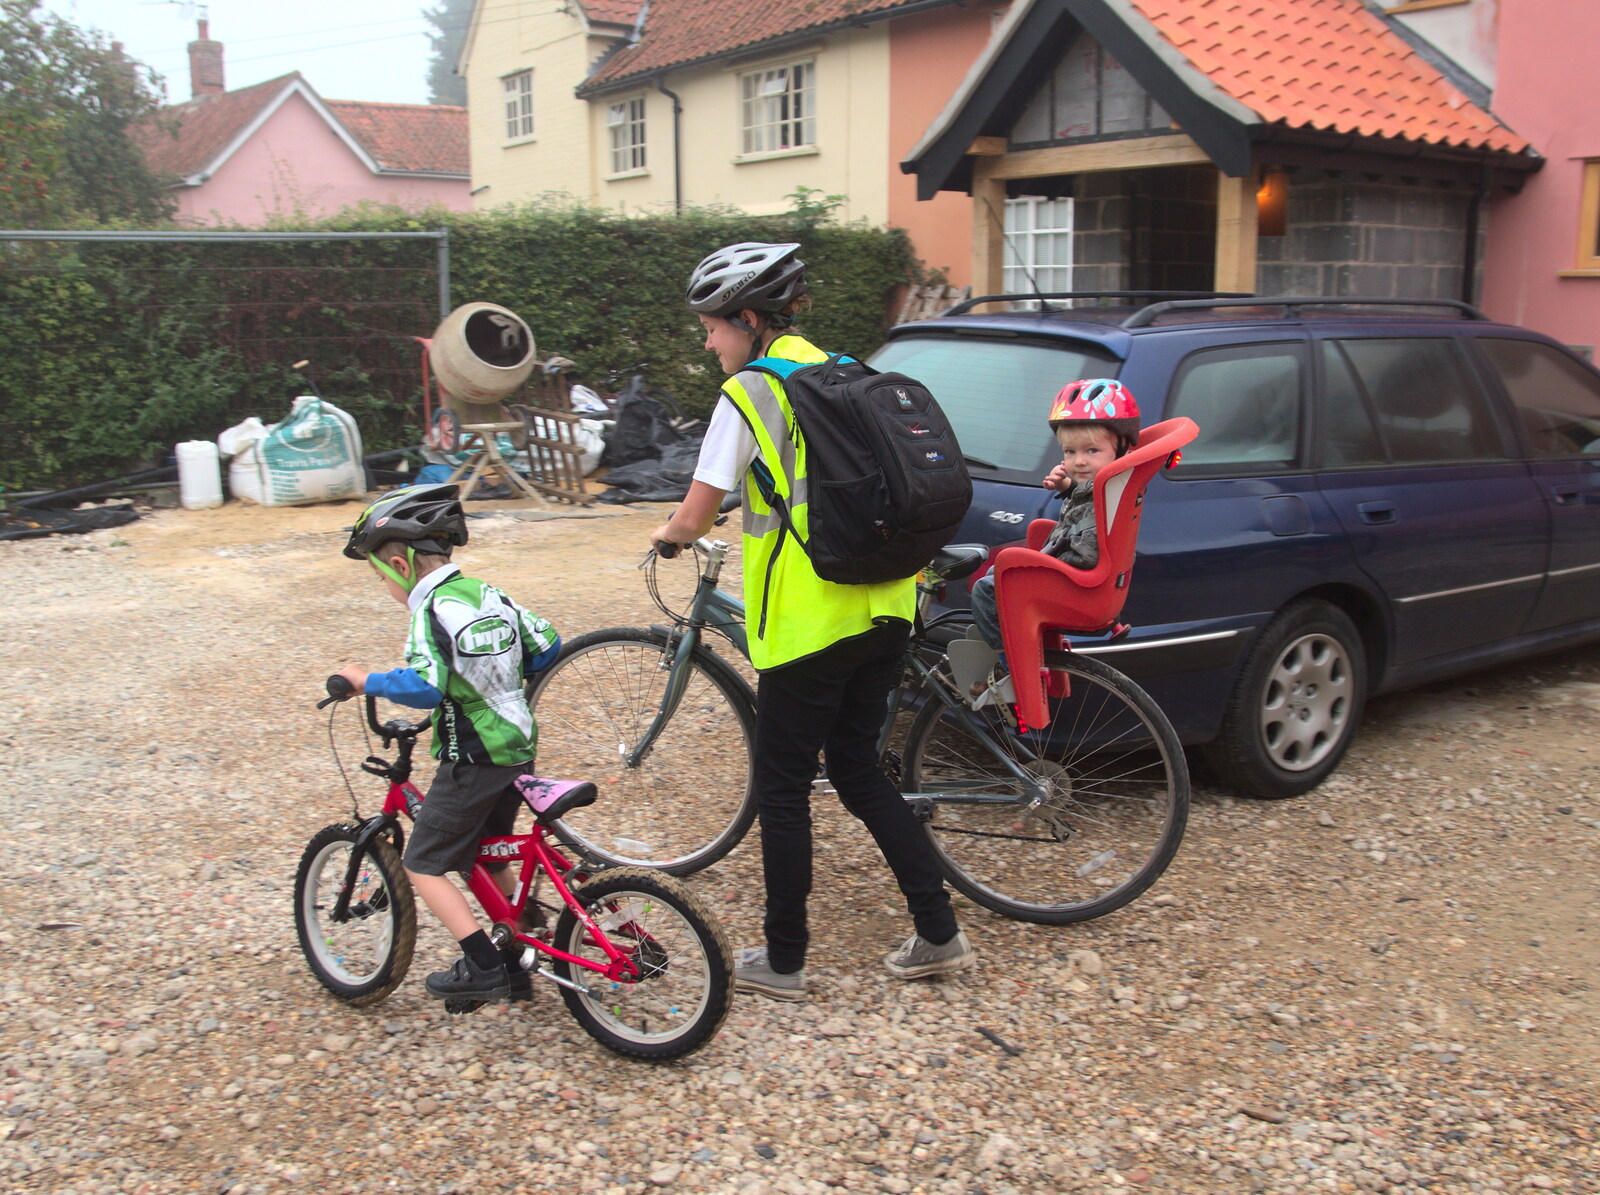 We head off on another bike ride from Bike Rides and the BSCC at the Railway, Mellis and Brome, Suffolk - 18th September 2014